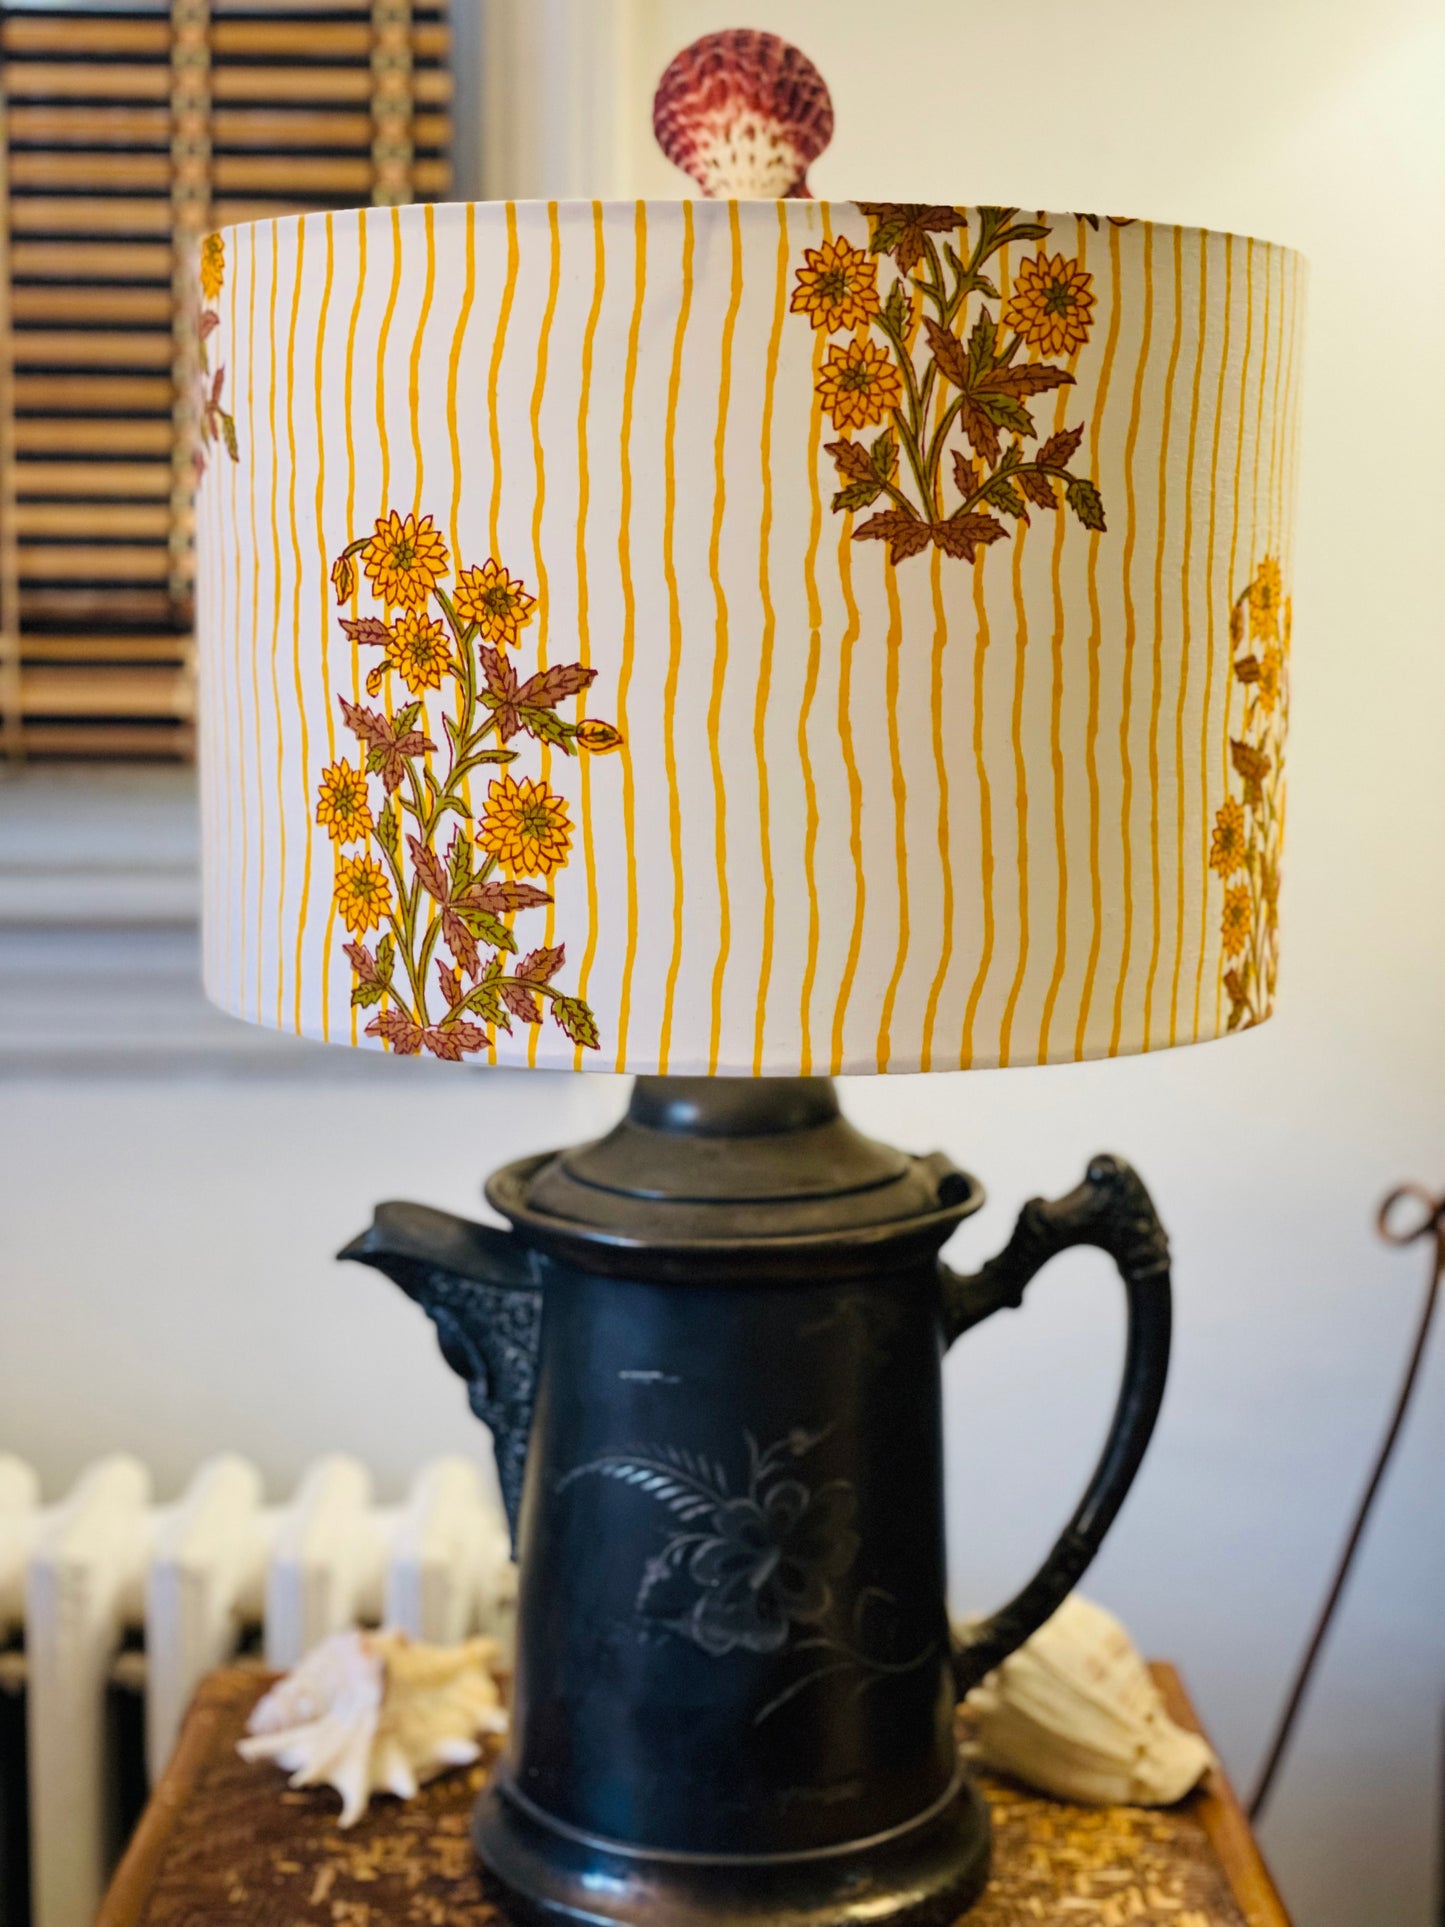 12 Inch Drum Shade. Indian Block print from Jaipur. Harvest Gold, Ginger, and Olive Floral Stripe.